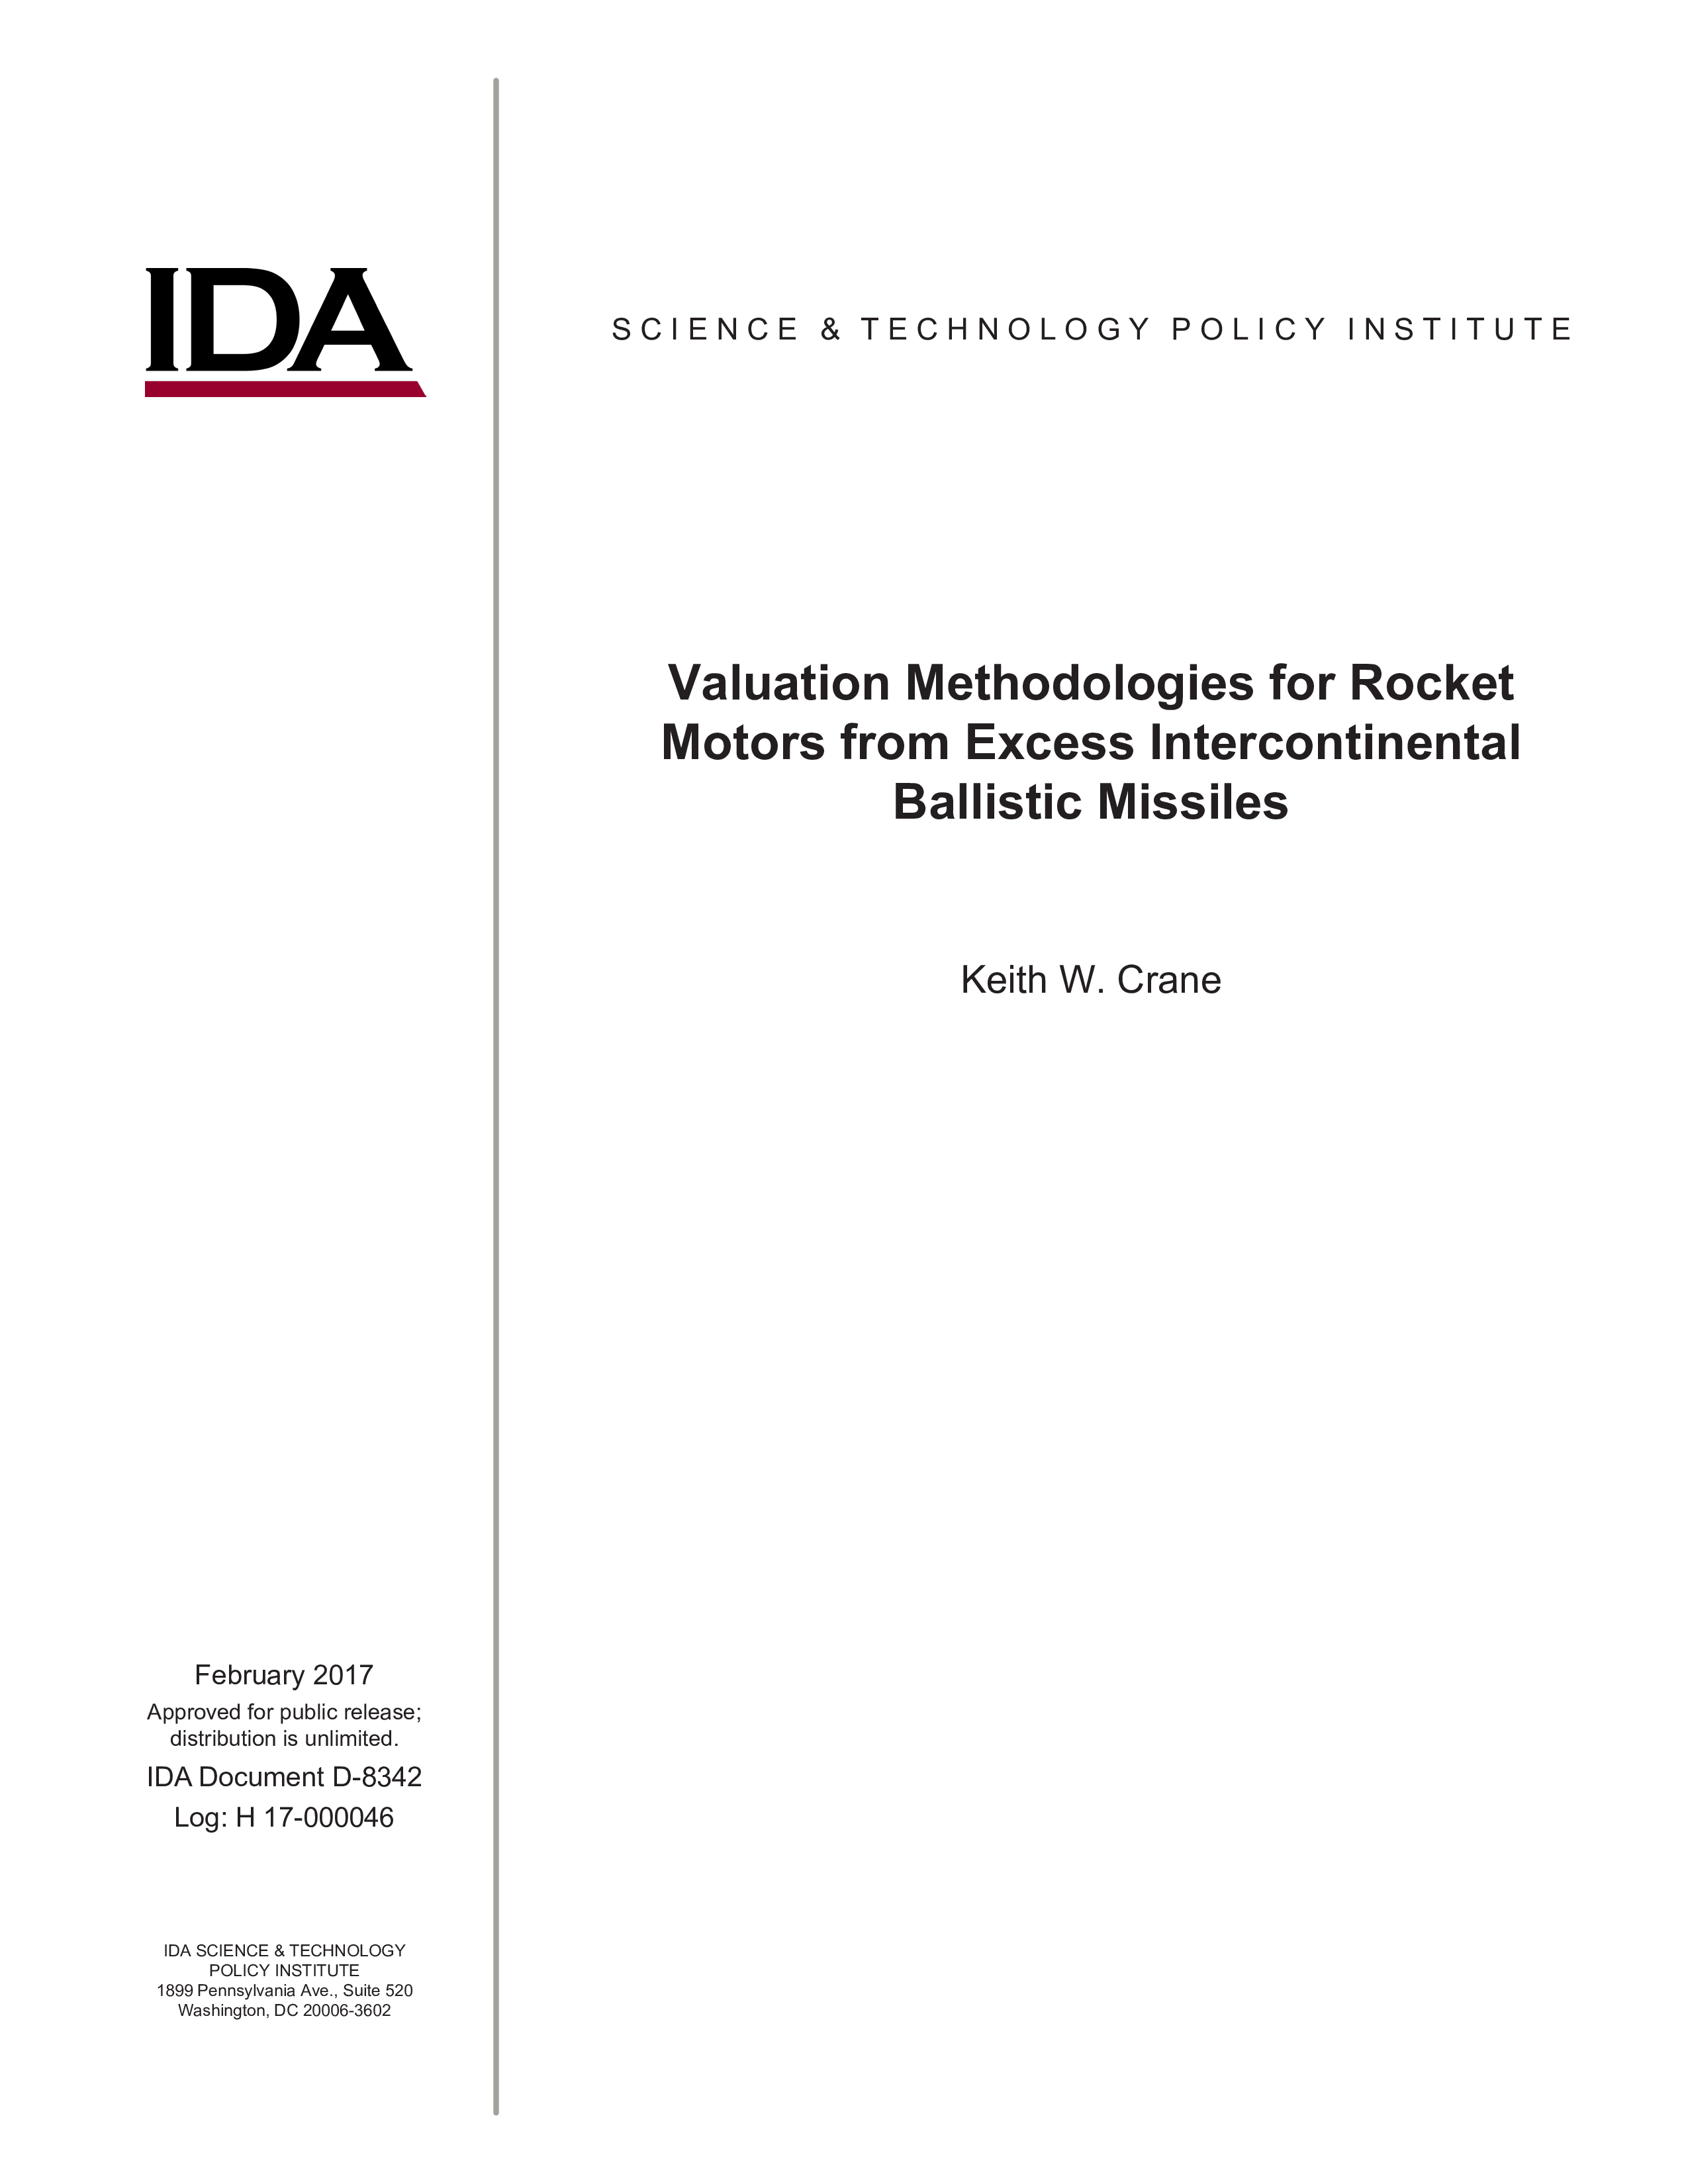 Valuation Methodologies for Rocket Motors from Excess Intercontinental Ballistic Missiles